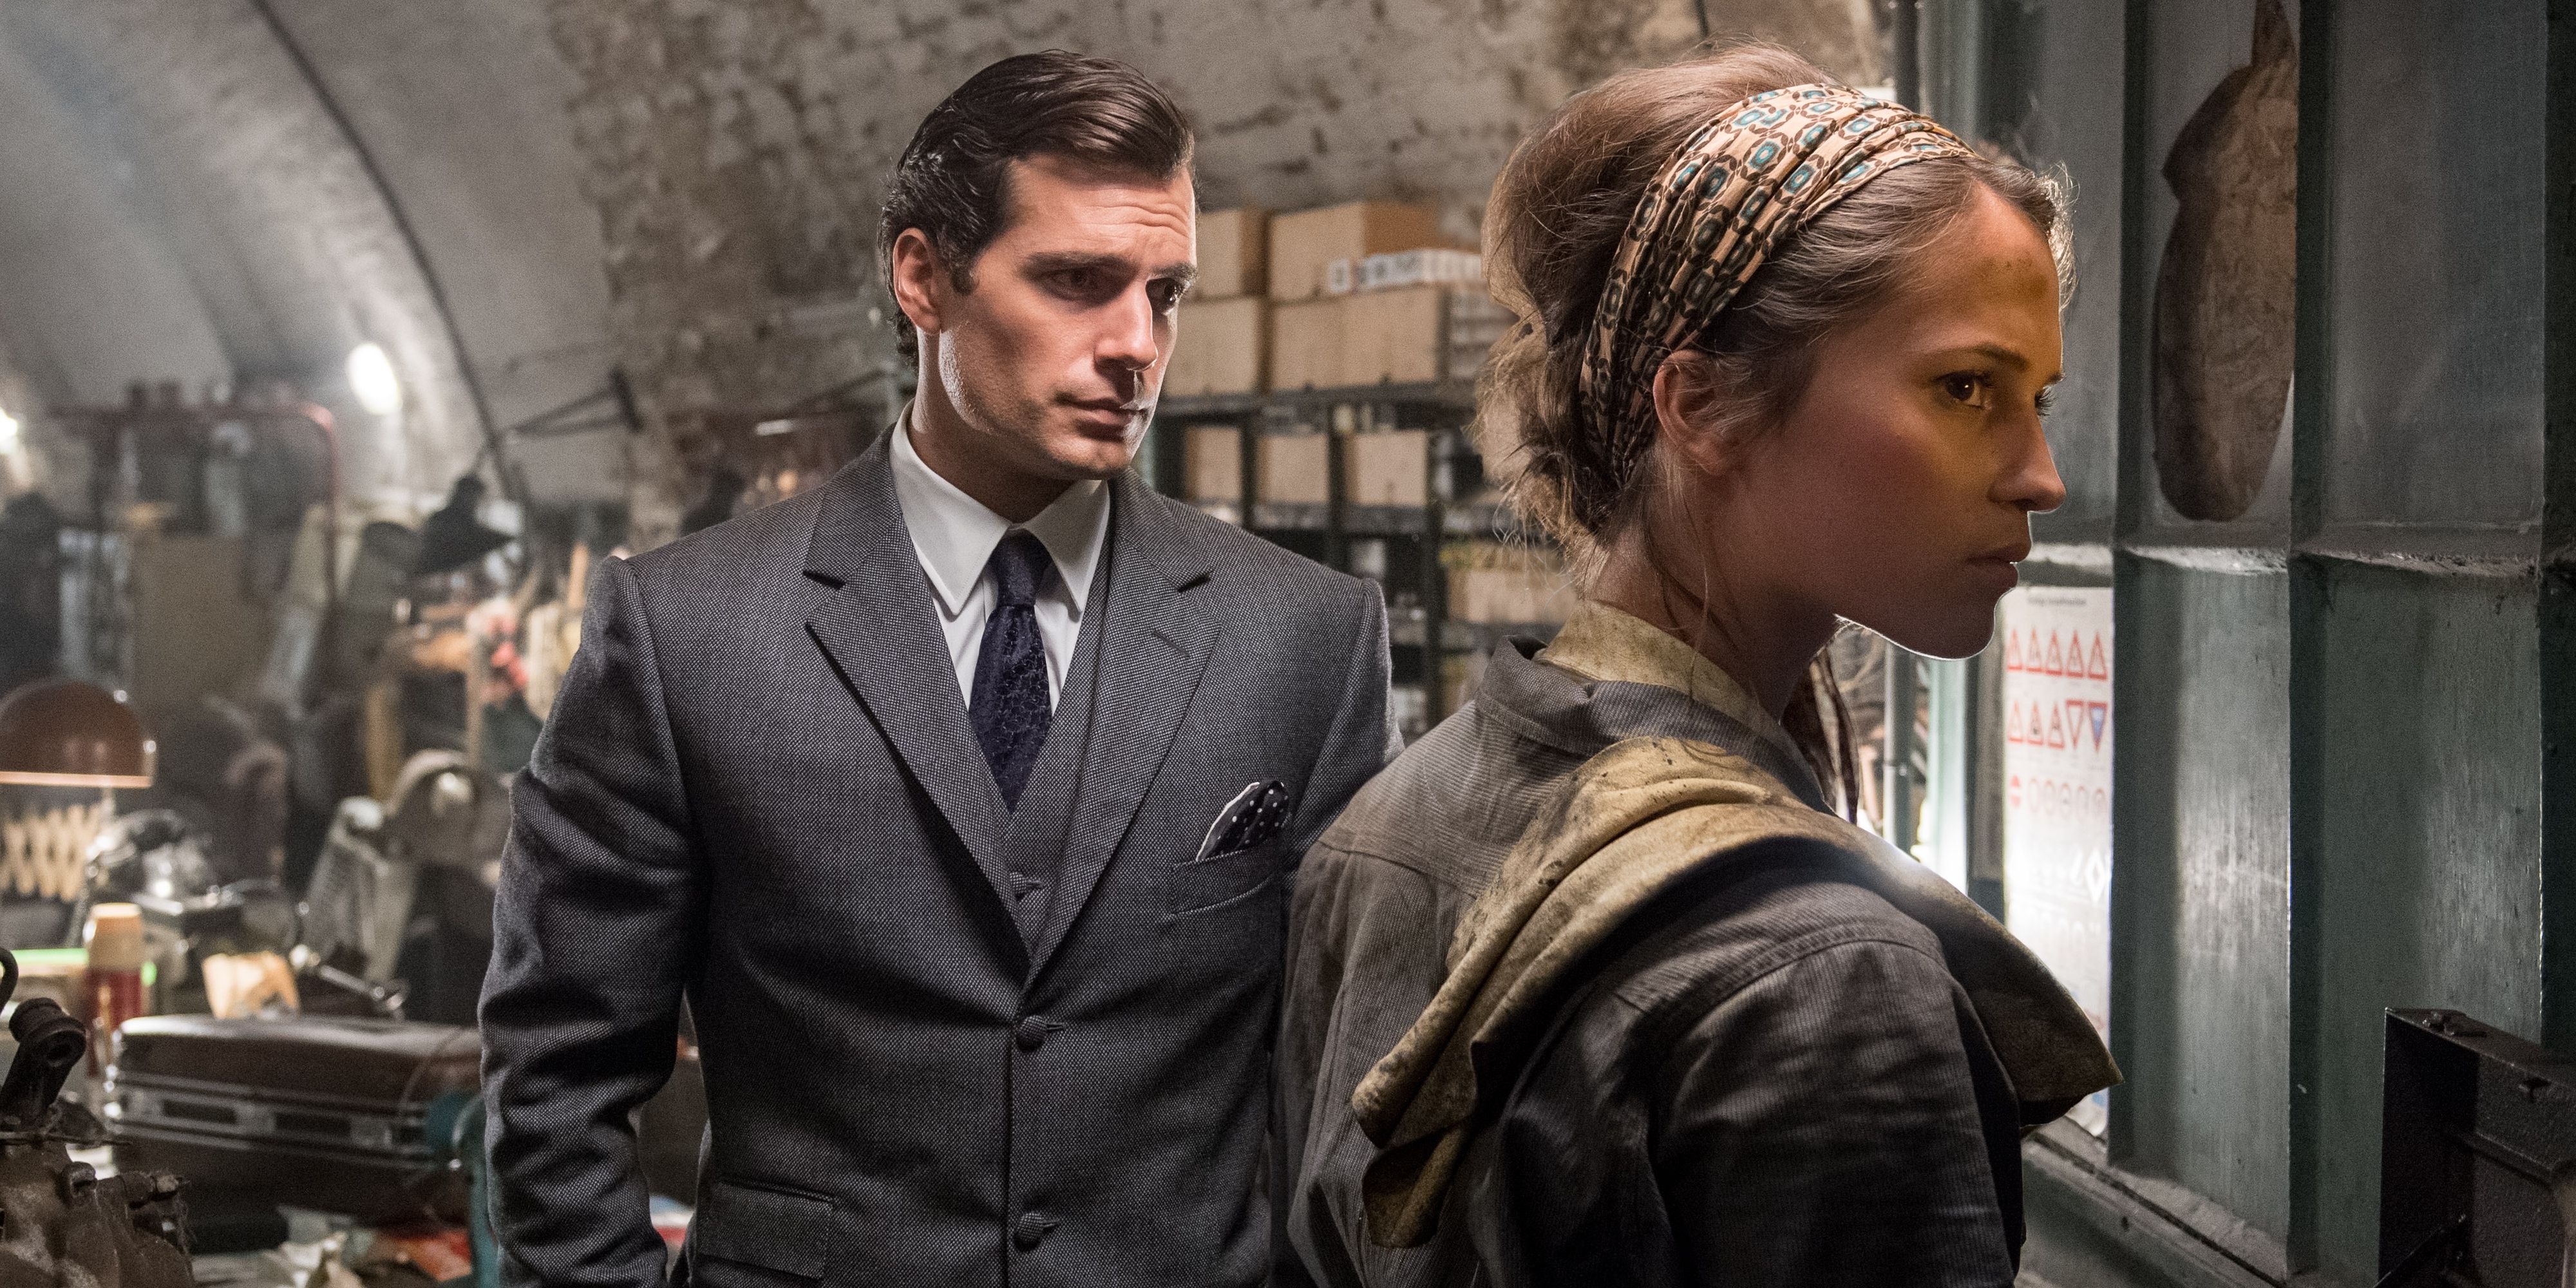 Napoleon Solo talking to Gabby at her repair shop in The Man from U.N.C.L.E.